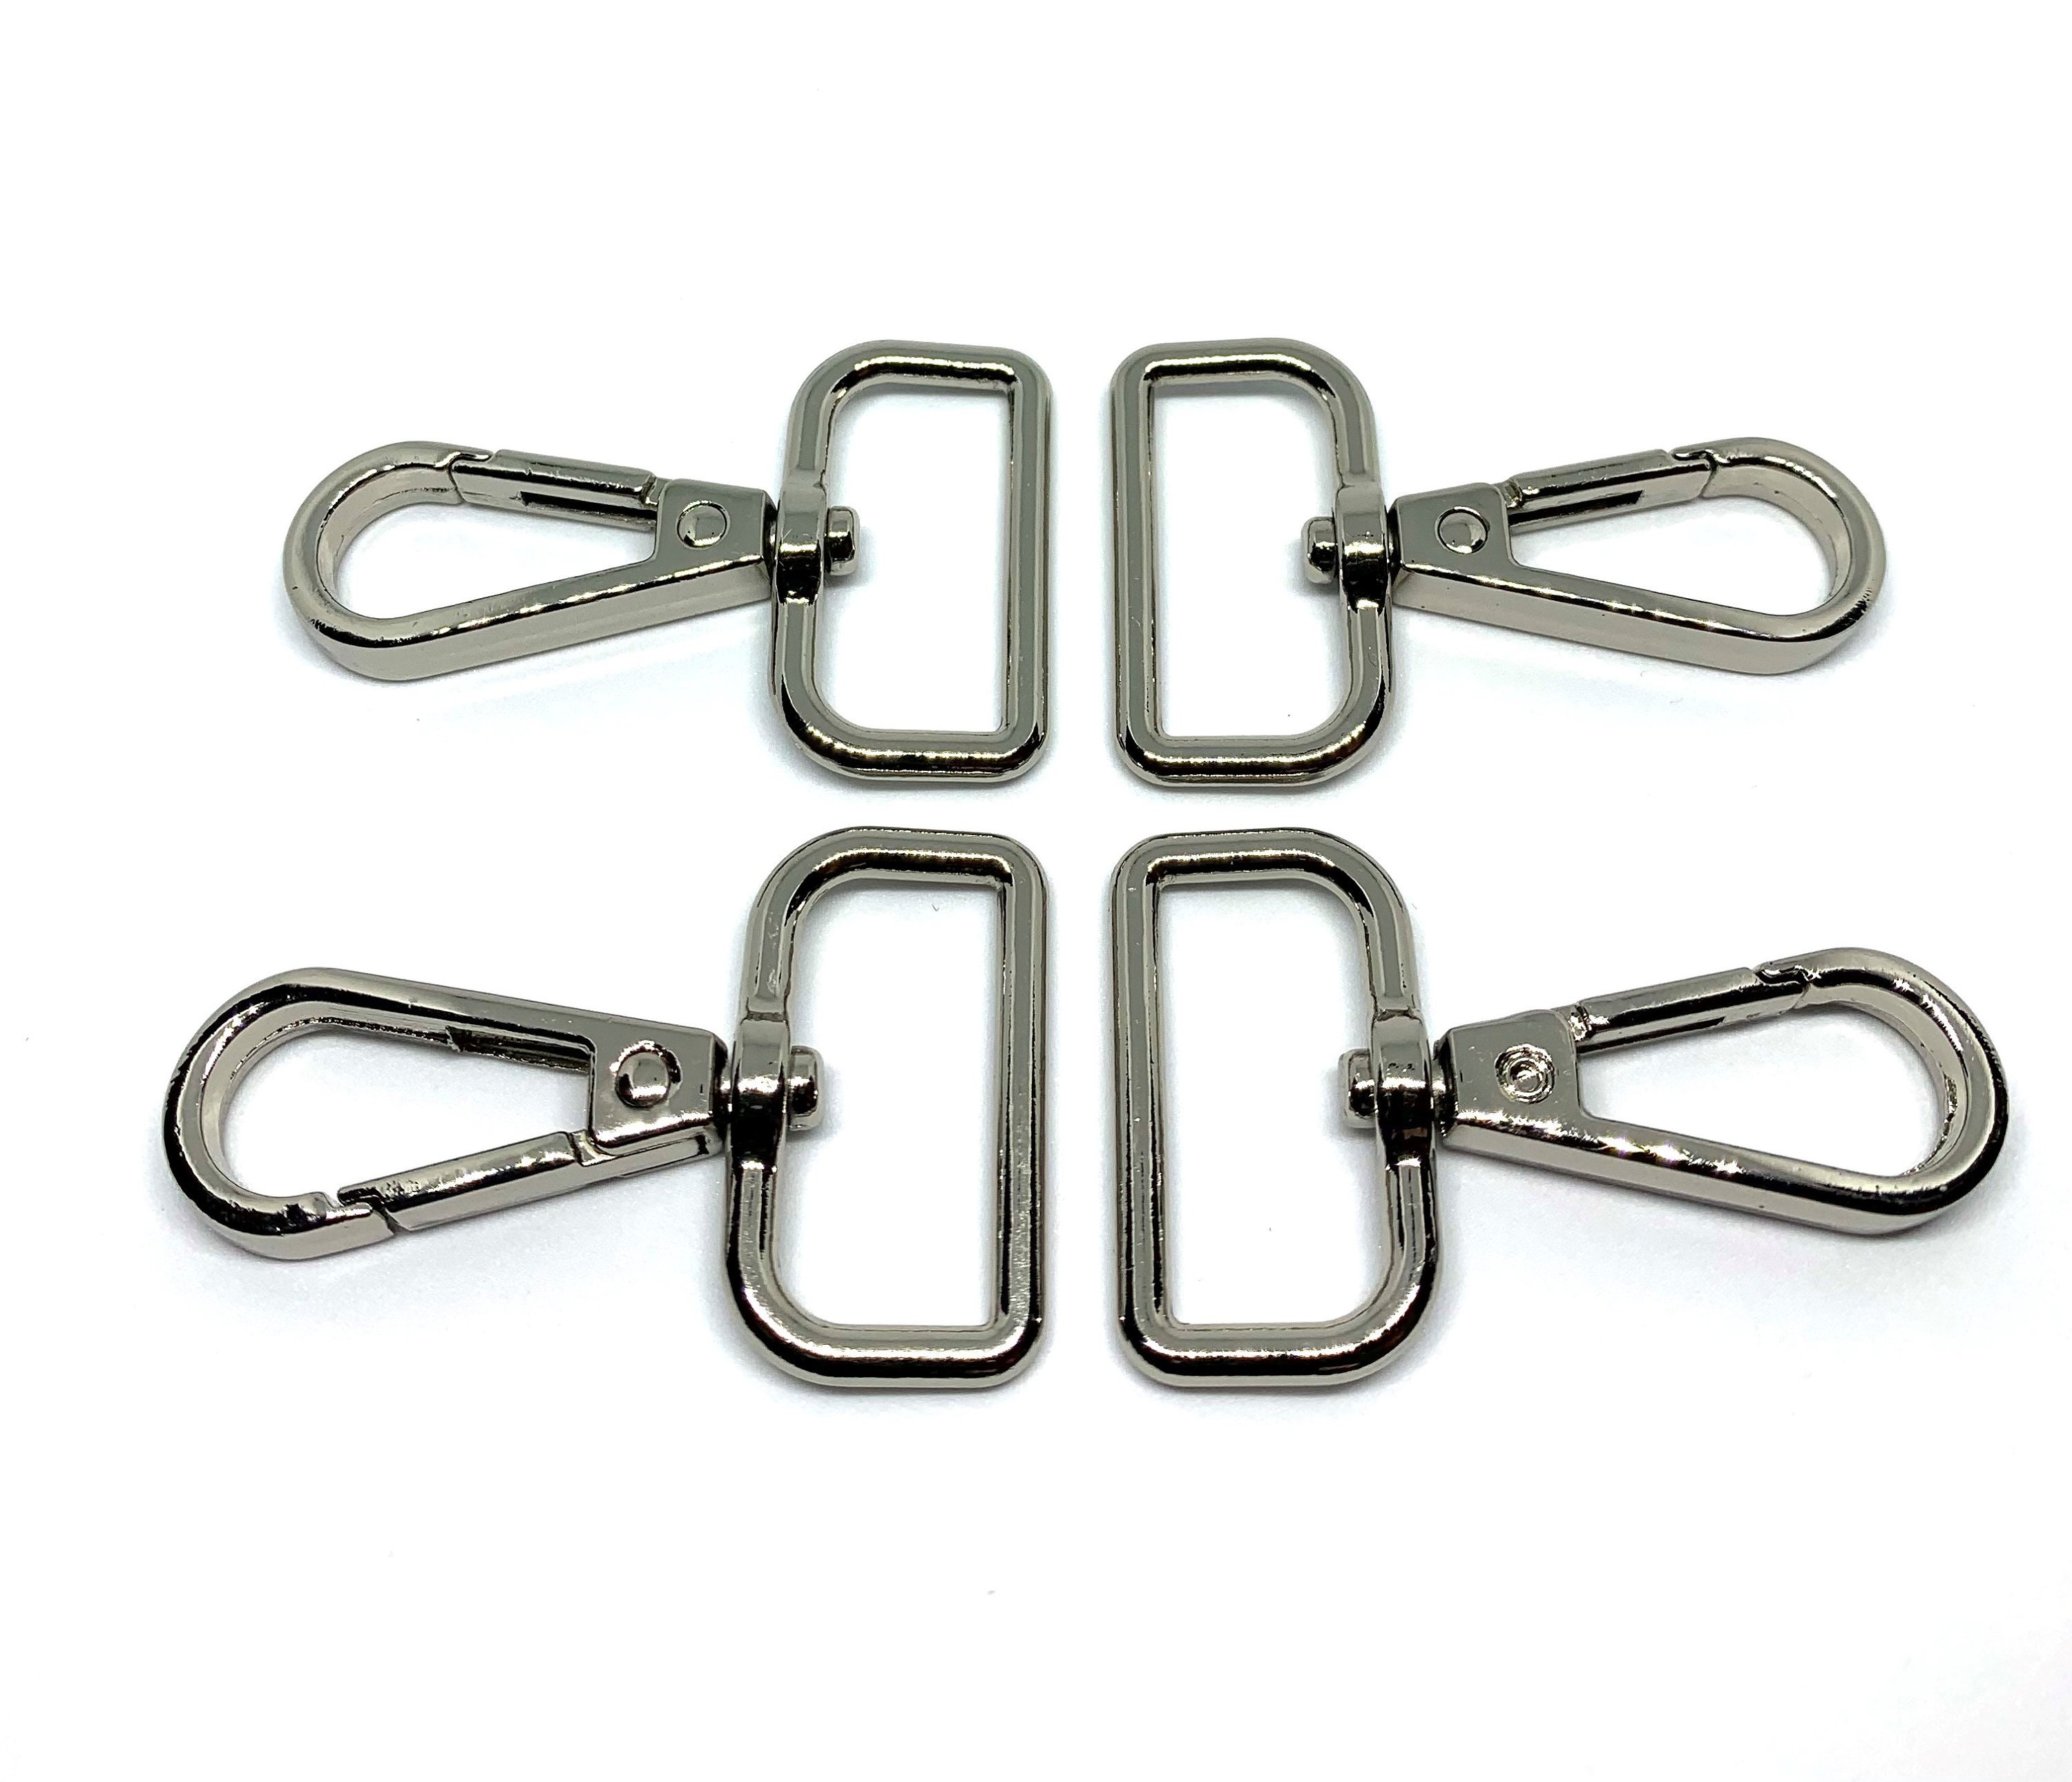 25mm 1 Inch Swivel Lobster Clasp Clips Snap Hooks Bag Making